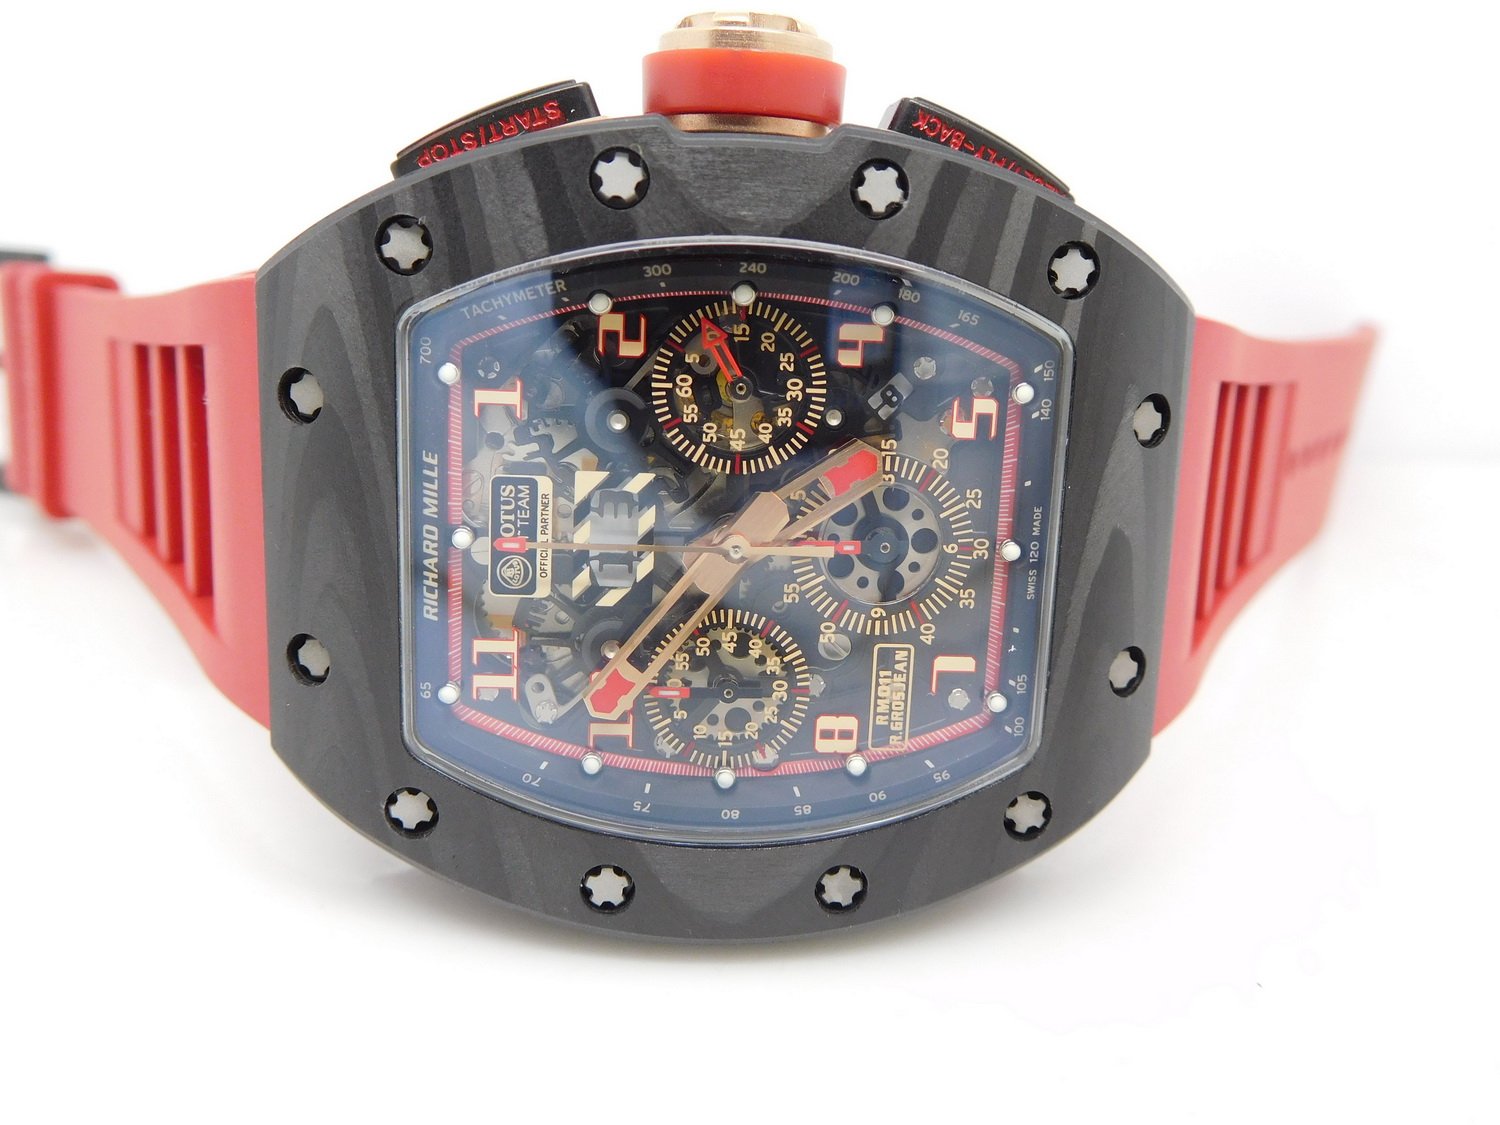 Richard Mille RM 011 Automatic Flyback Chronograph NTPT LOTUS F1